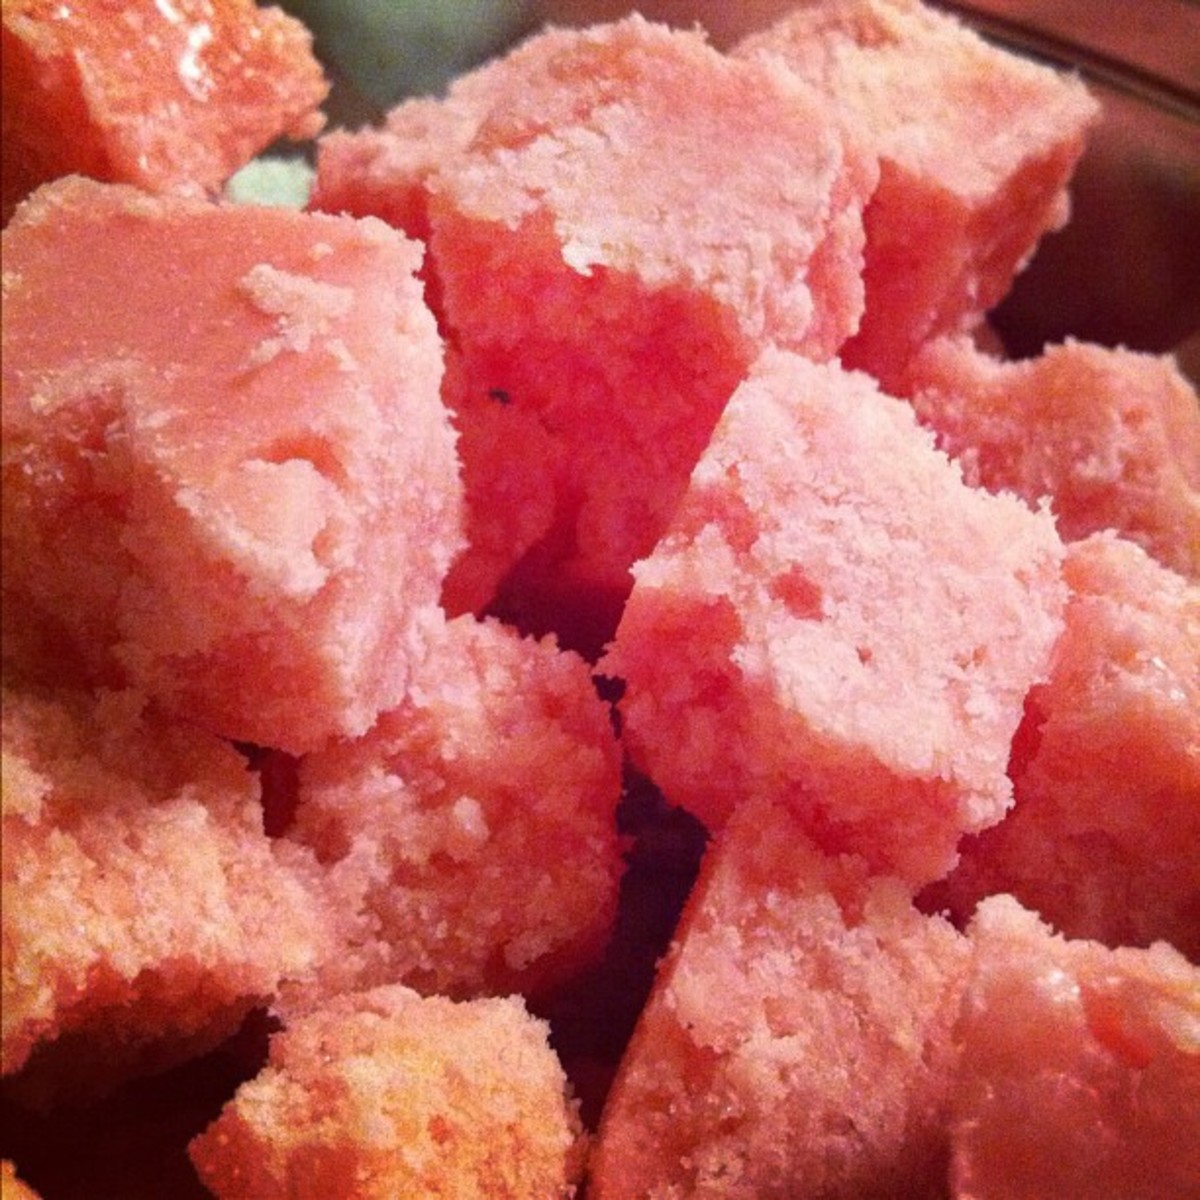 Pink coconut ice